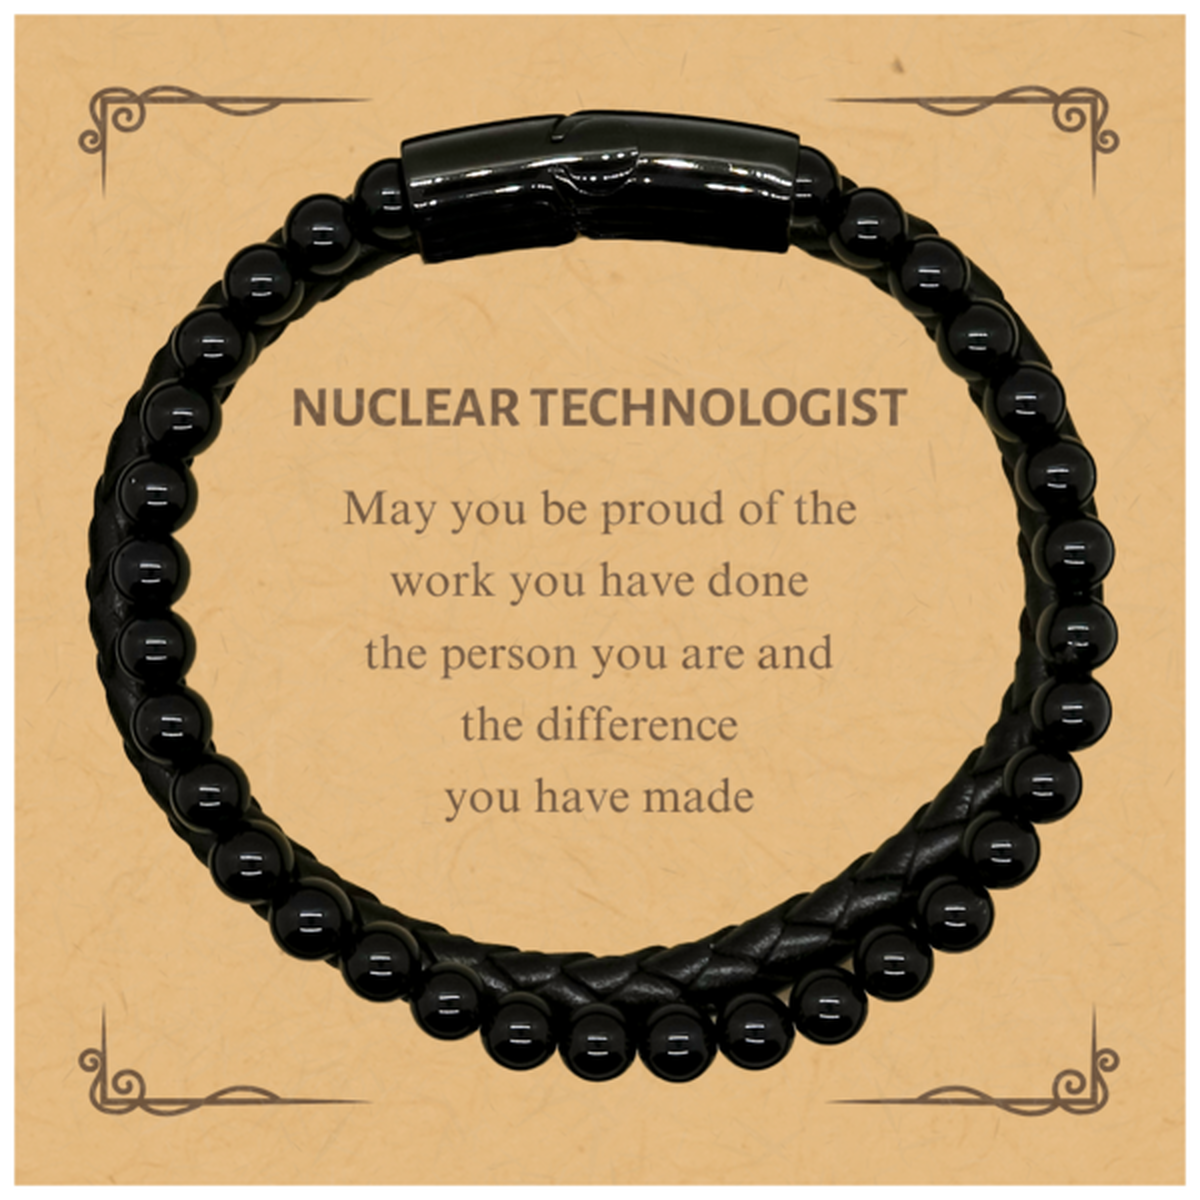 Nuclear Technologist May you be proud of the work you have done, Retirement Nuclear Technologist Stone Leather Bracelets for Colleague Appreciation Gifts Amazing for Nuclear Technologist